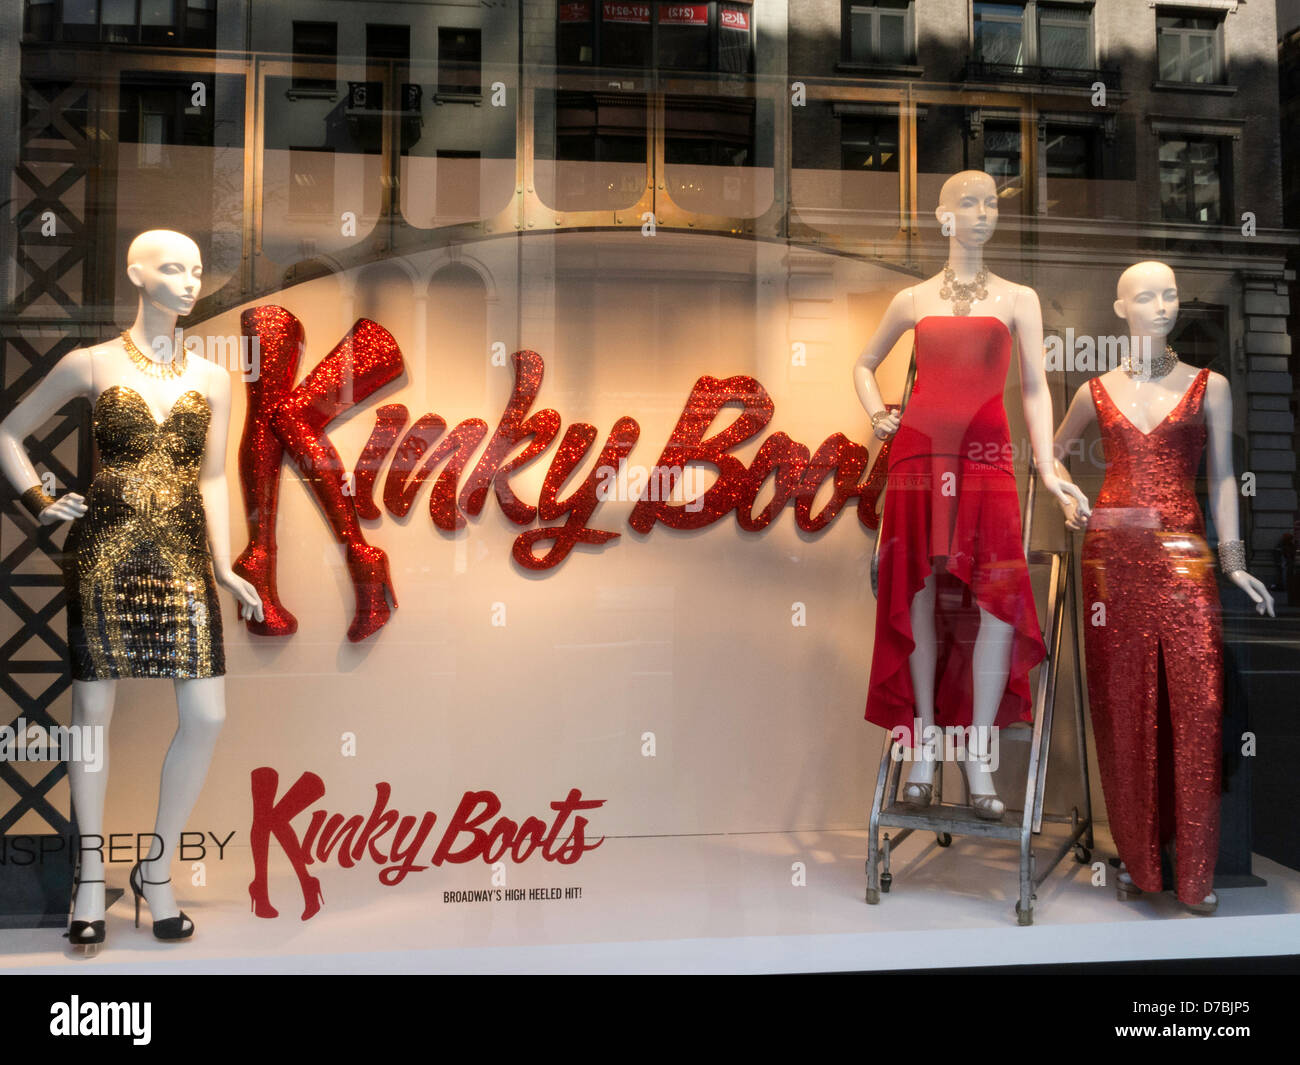 Kinky Boots Broadway Musical Display Window, Lord & Taylor, Flagship Store, 424 Fifth Avenue, NYC 2013 Stockfoto